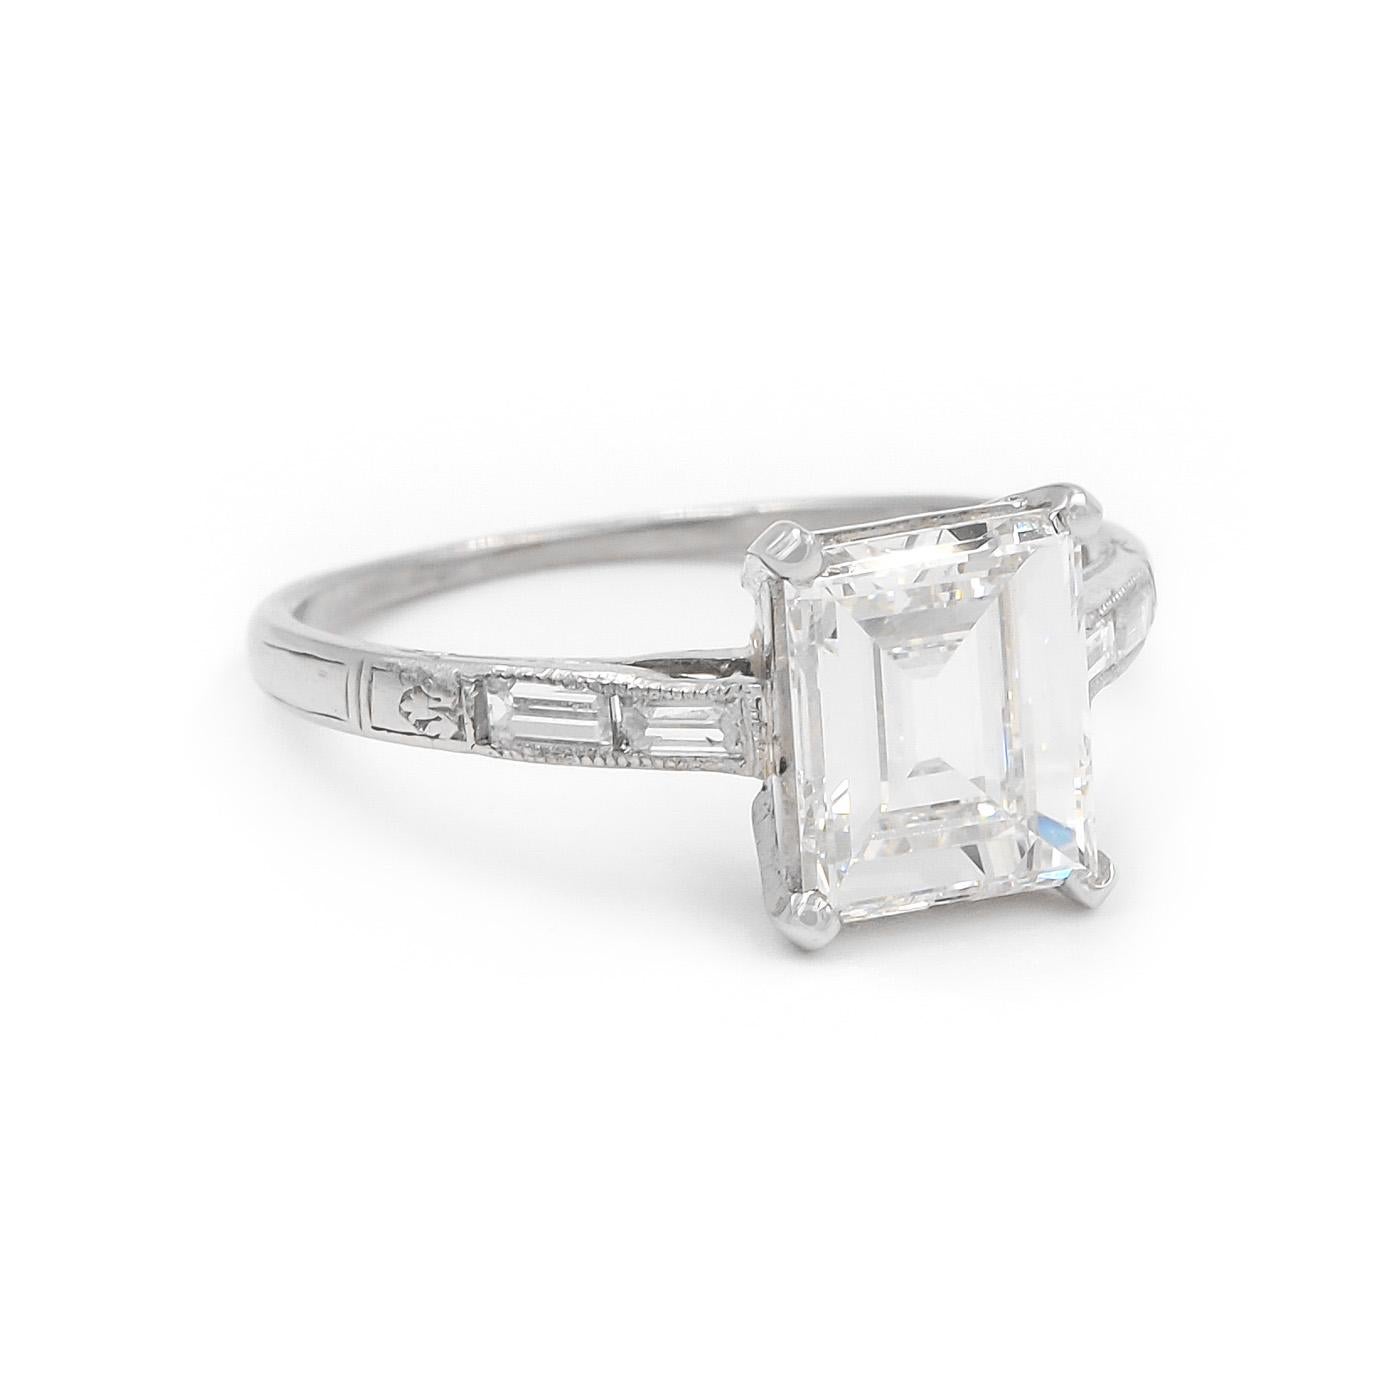 American Art Deco Era 1.67 Carat Step Cut Diamond Engagement Ring composed of platinum. Featuring a 1.67 carat Step Cut diamond, GIA certified H color & VS2 clarity. With an additional 4 Baguette Cut diamonds set into the shoulders weighing